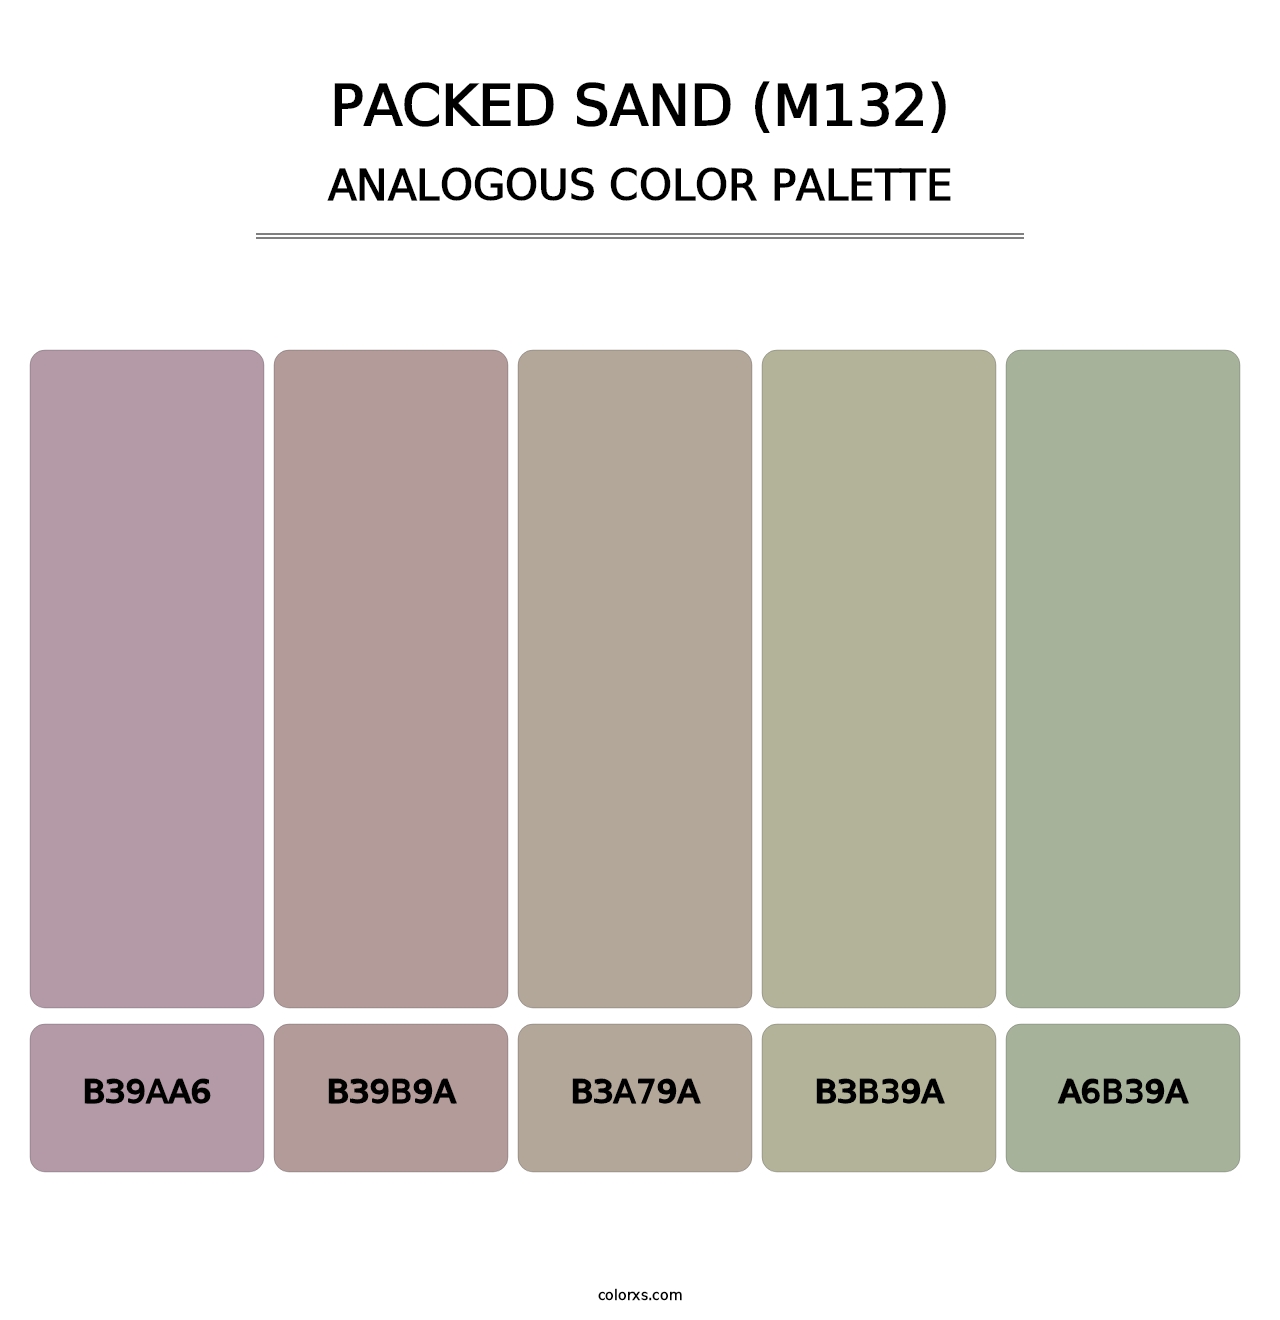 Packed Sand (M132) - Analogous Color Palette